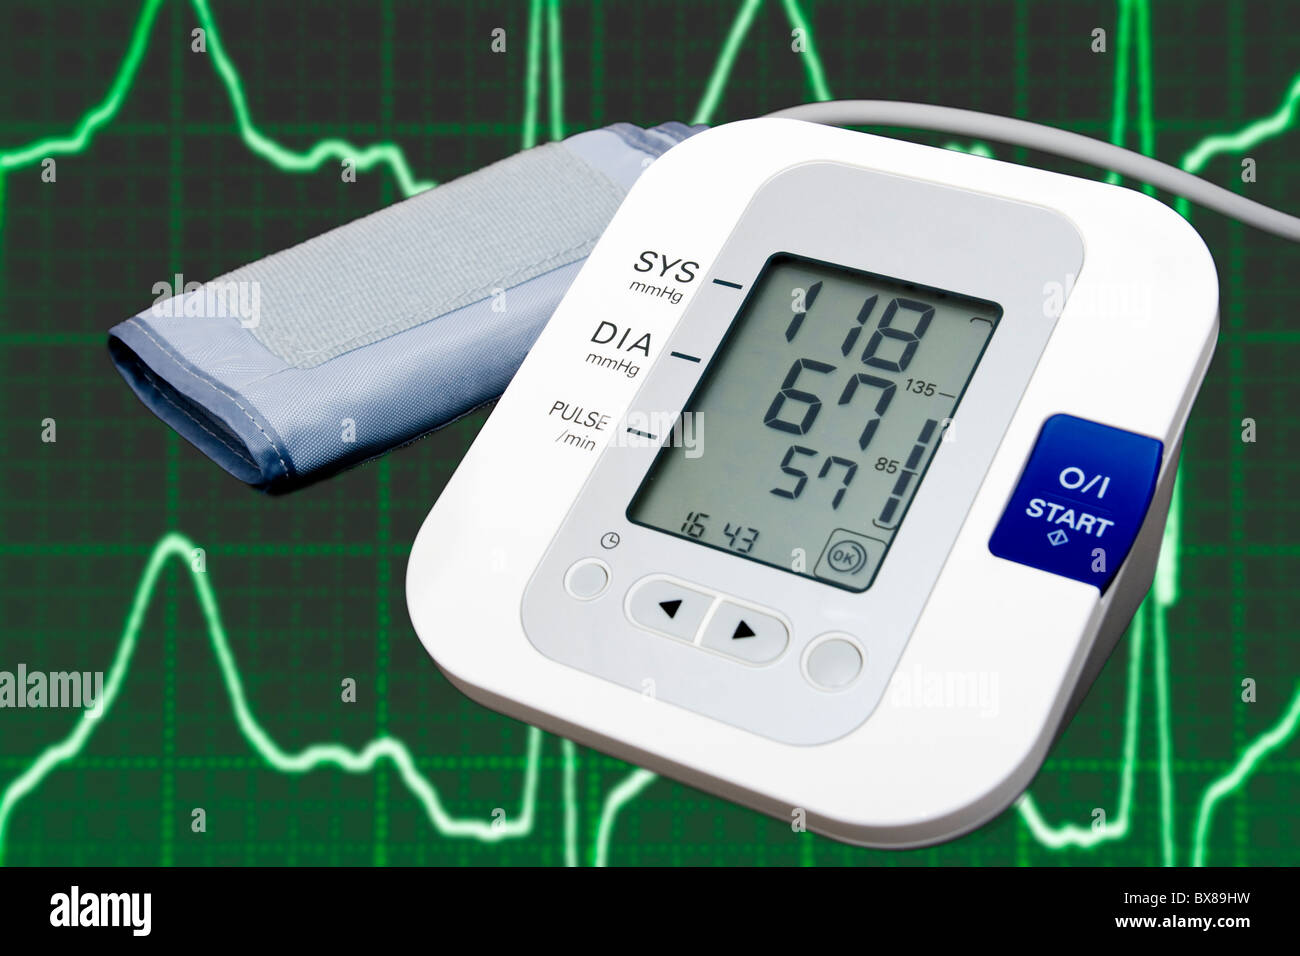 Digital blood pressure monitor with cardiogram in the background Stock Photo